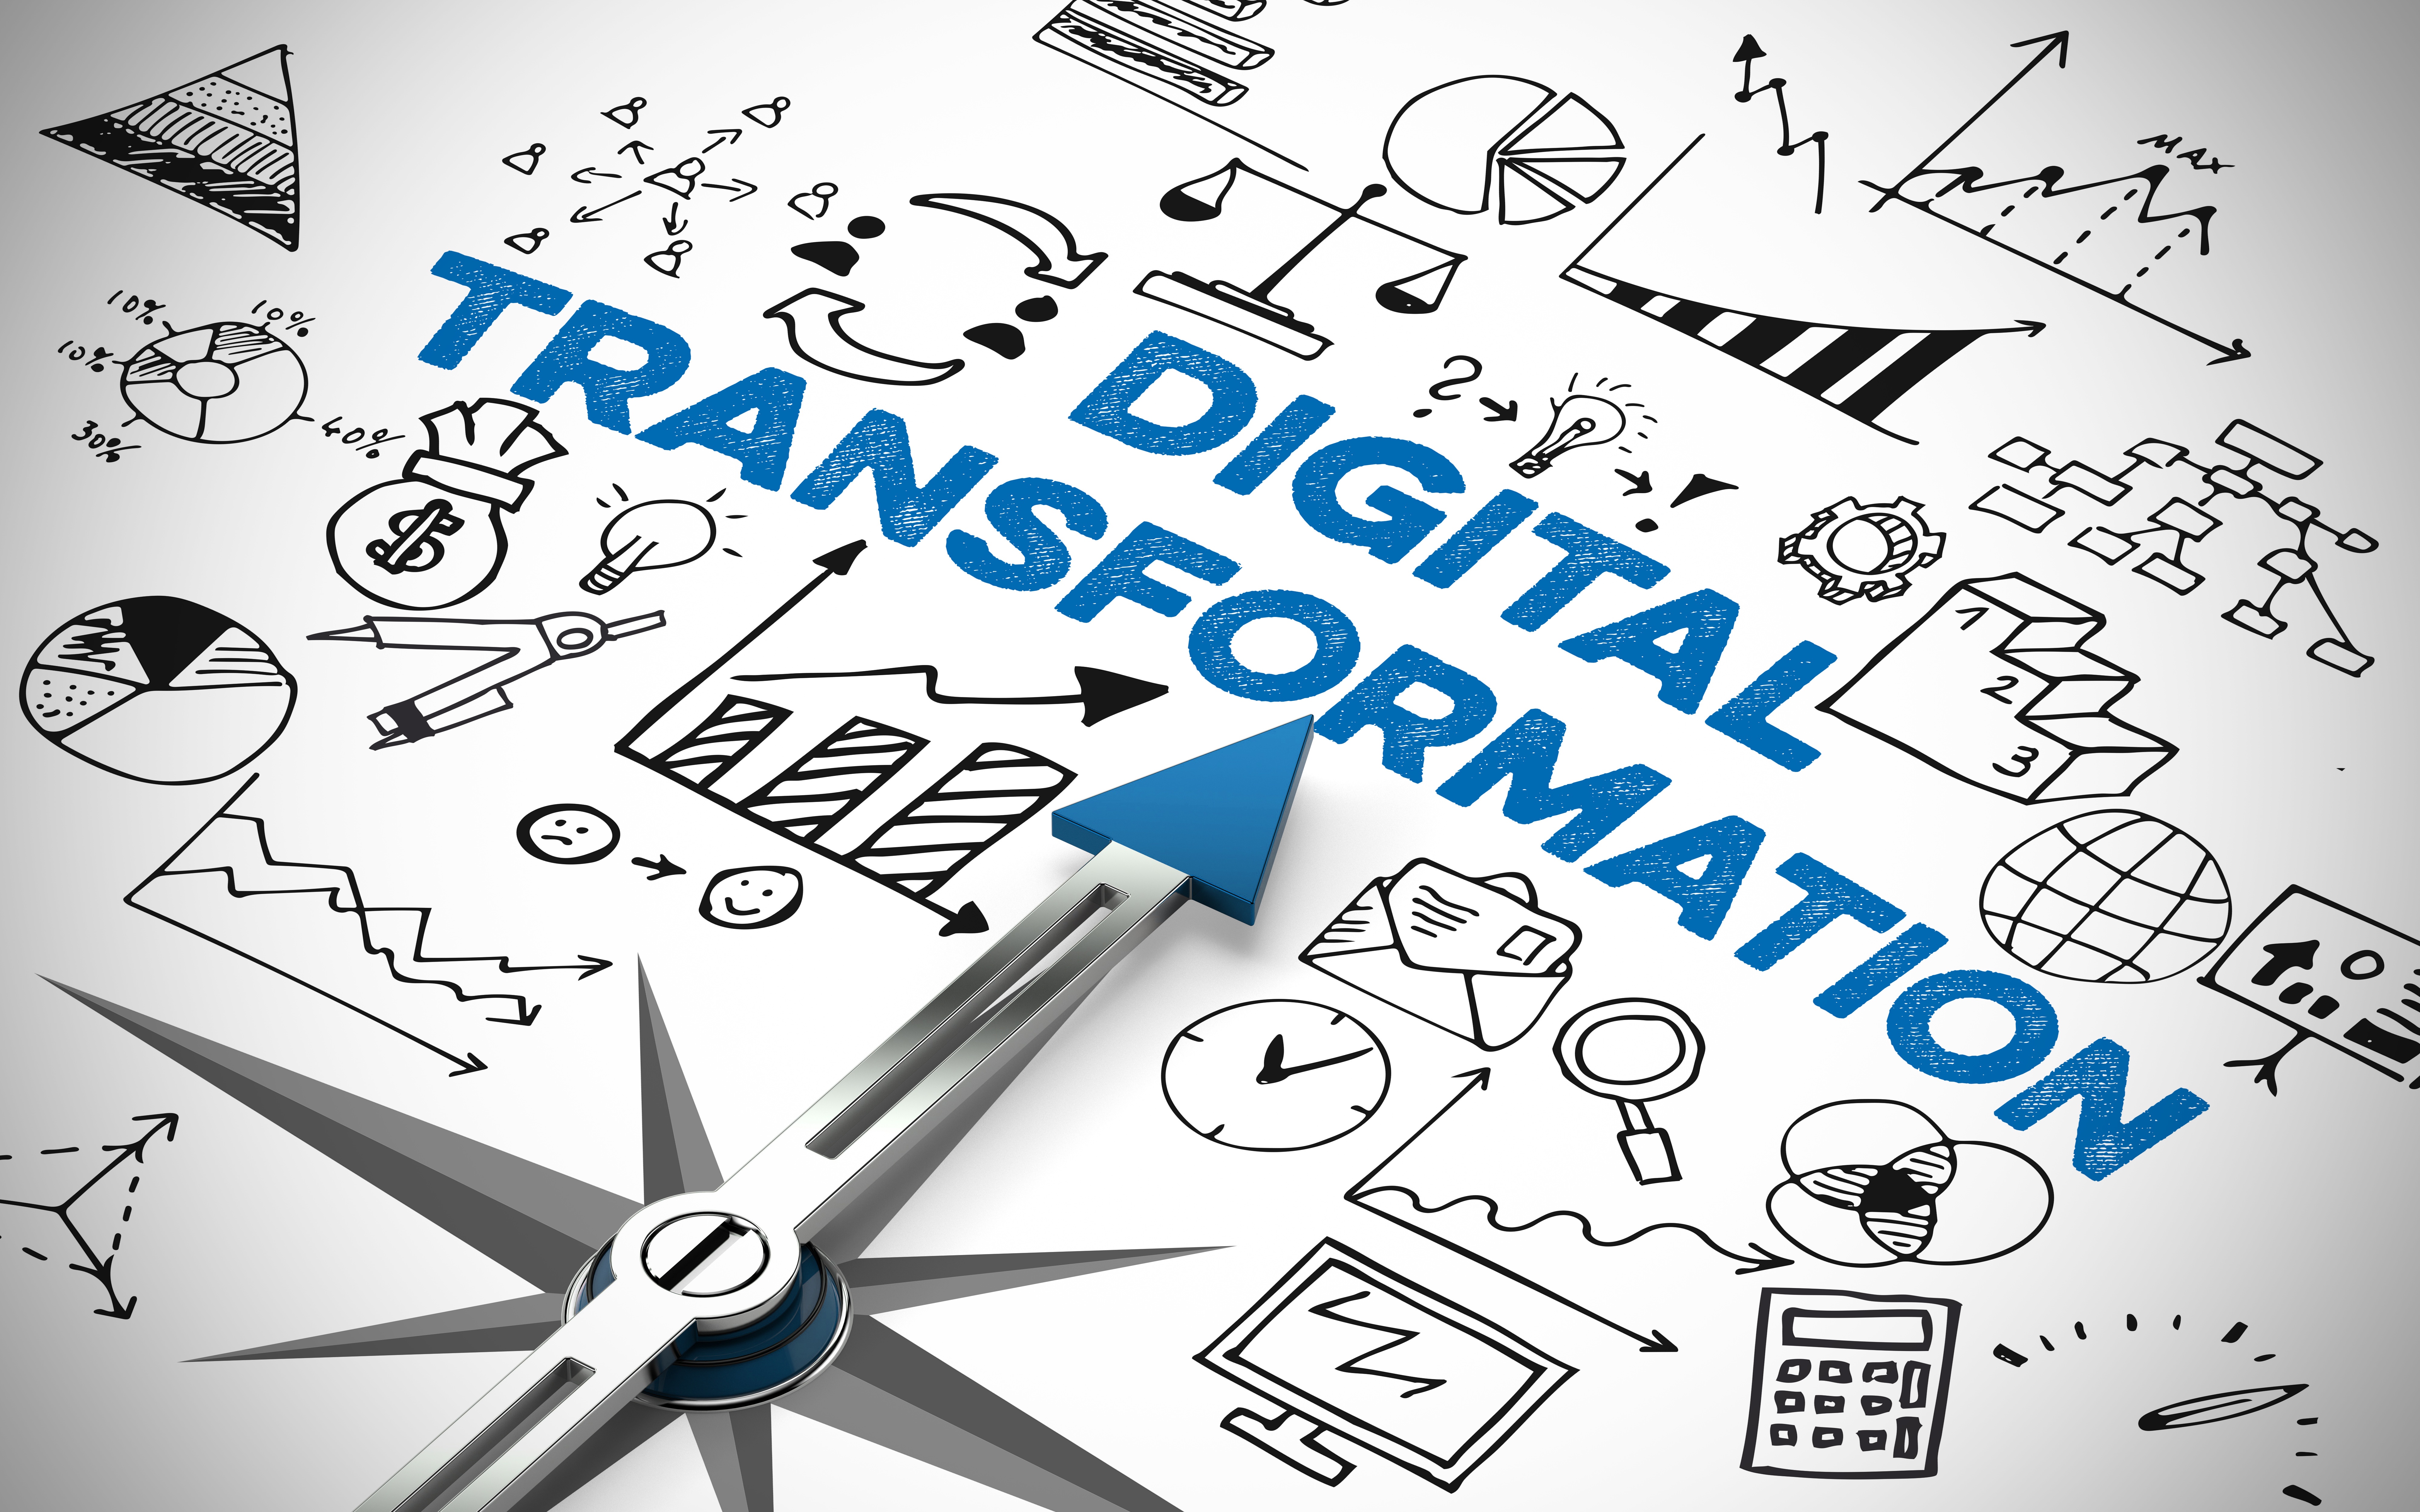 Digital Transformation: 10 Dos and Don'ts for CEOs